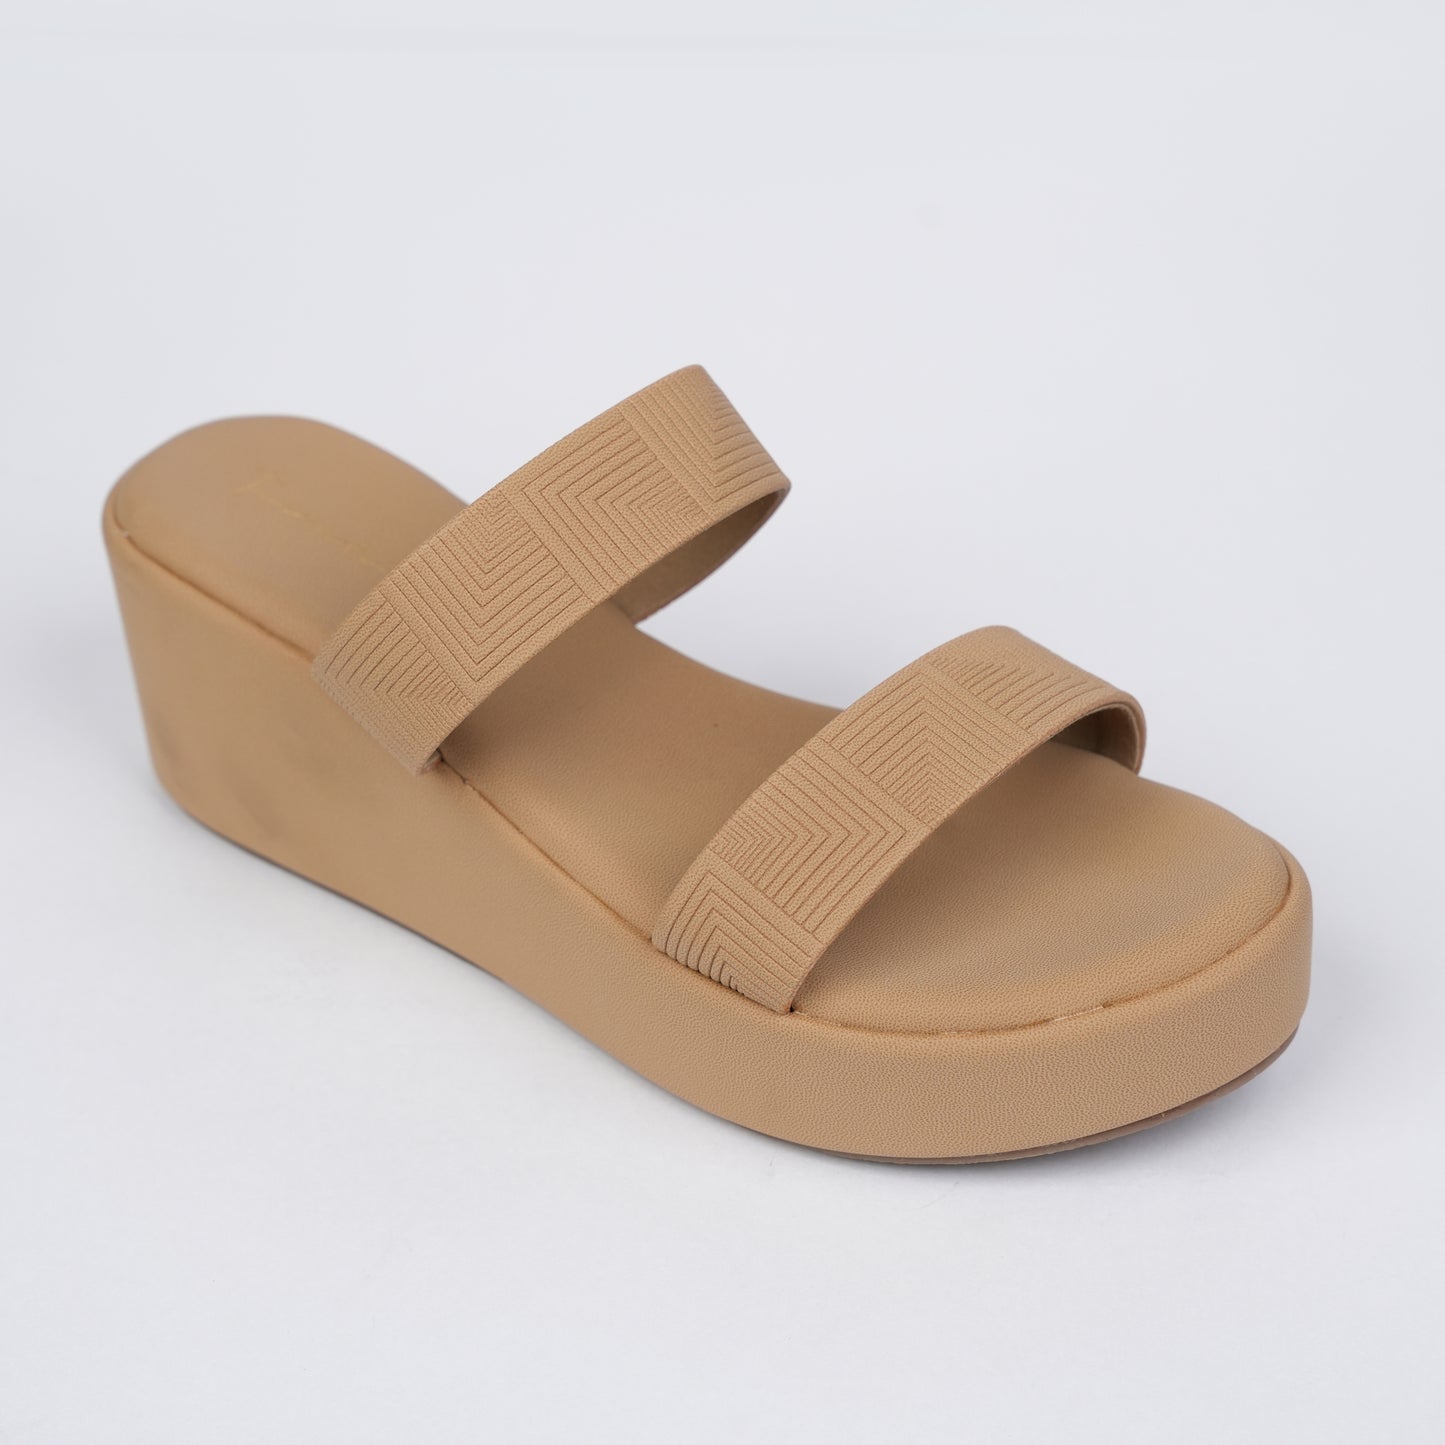 Ria two strap wedges in beige